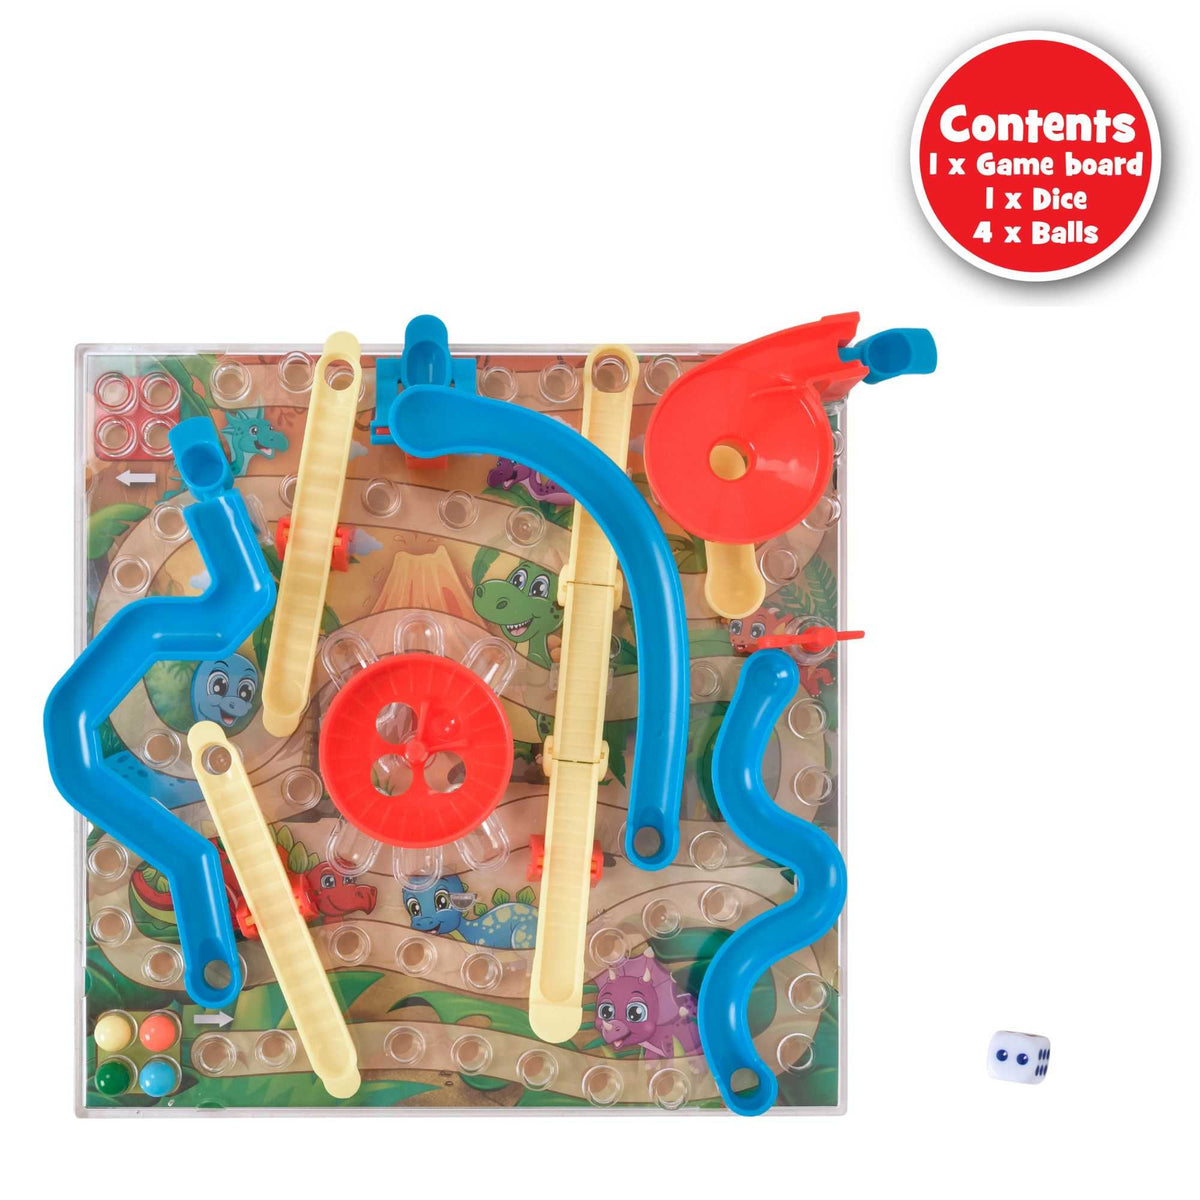 Snakes and Ladders Dinosaur Family Board Game, 3D toys, Educations games, jurassic park games, Strategy Game, Games night, Childrens dinosaur present